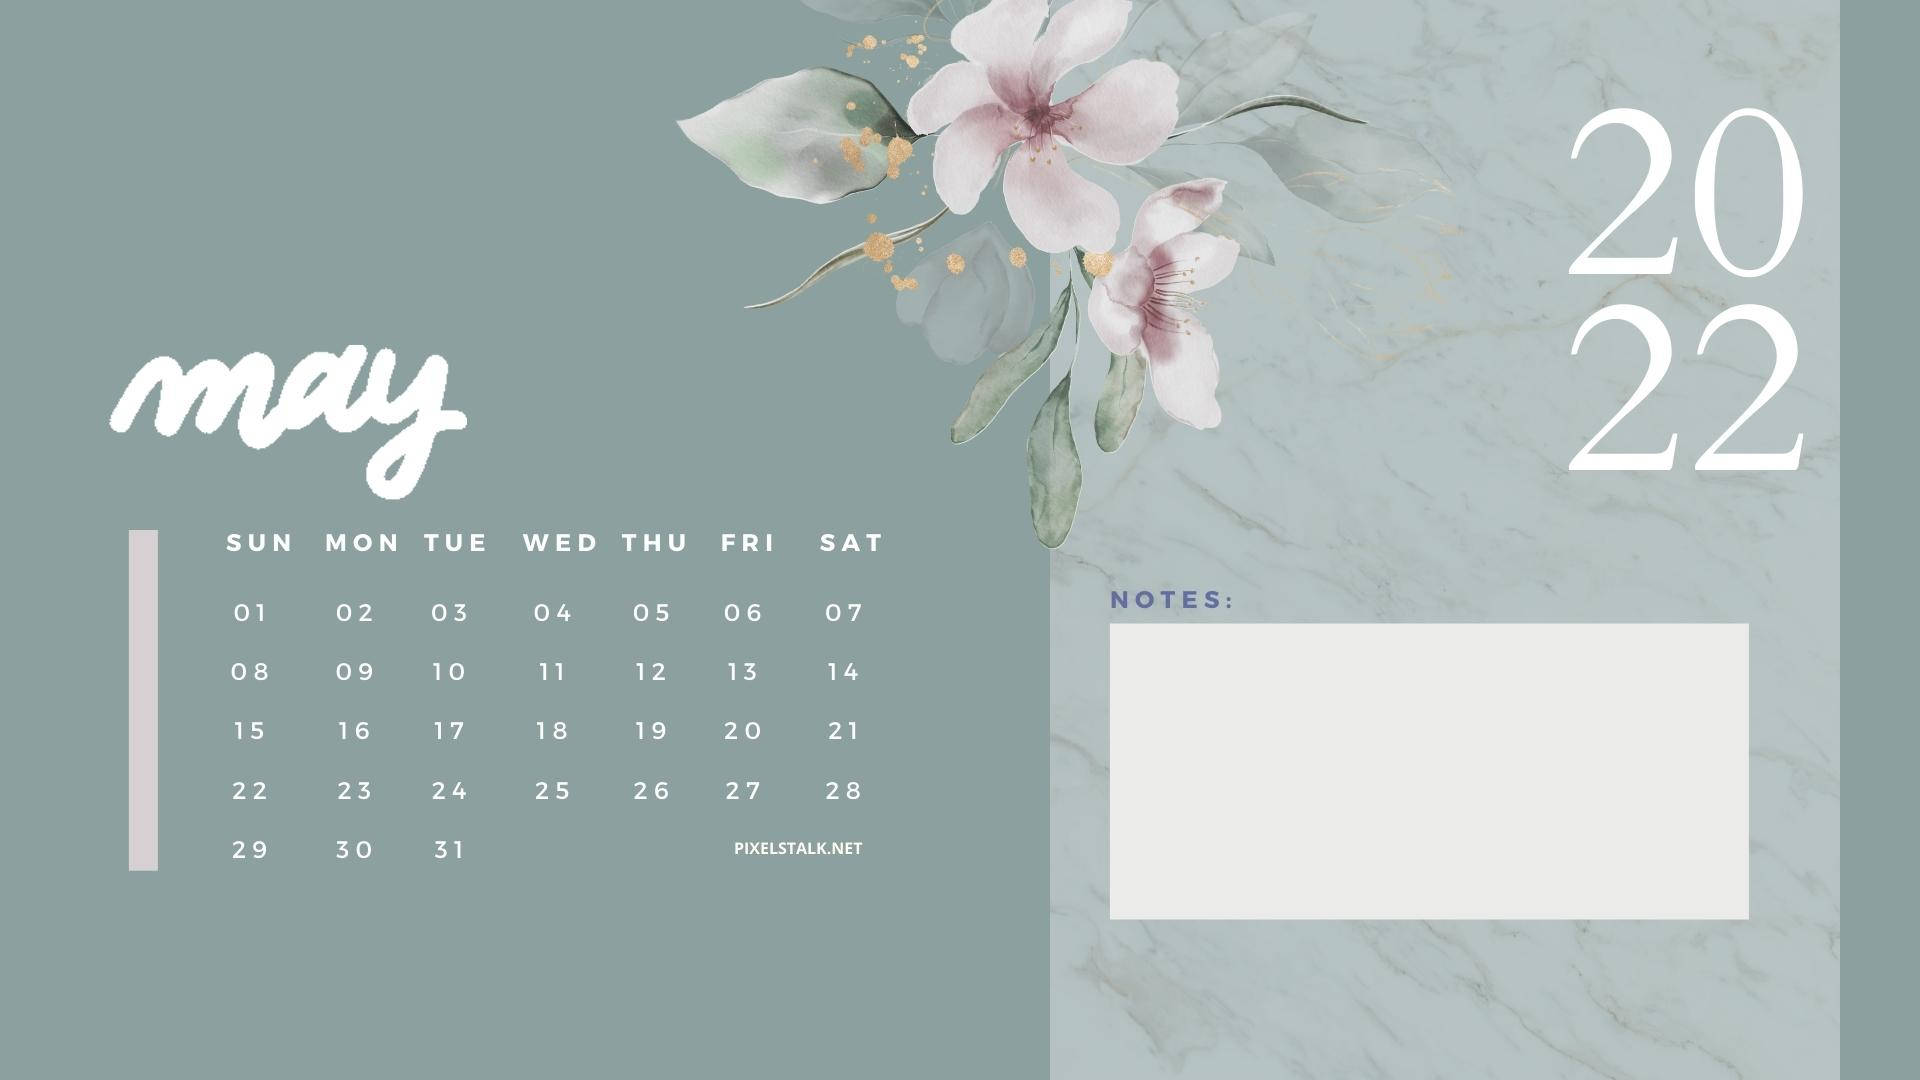 May Wallpaper 2022 May Wallpaper 2022 with the keywords Aesthetic  Background calendar Colourful cute httpswwwixpapercom  カレンダー  シンプル バースデーカード 手書き カレンダー